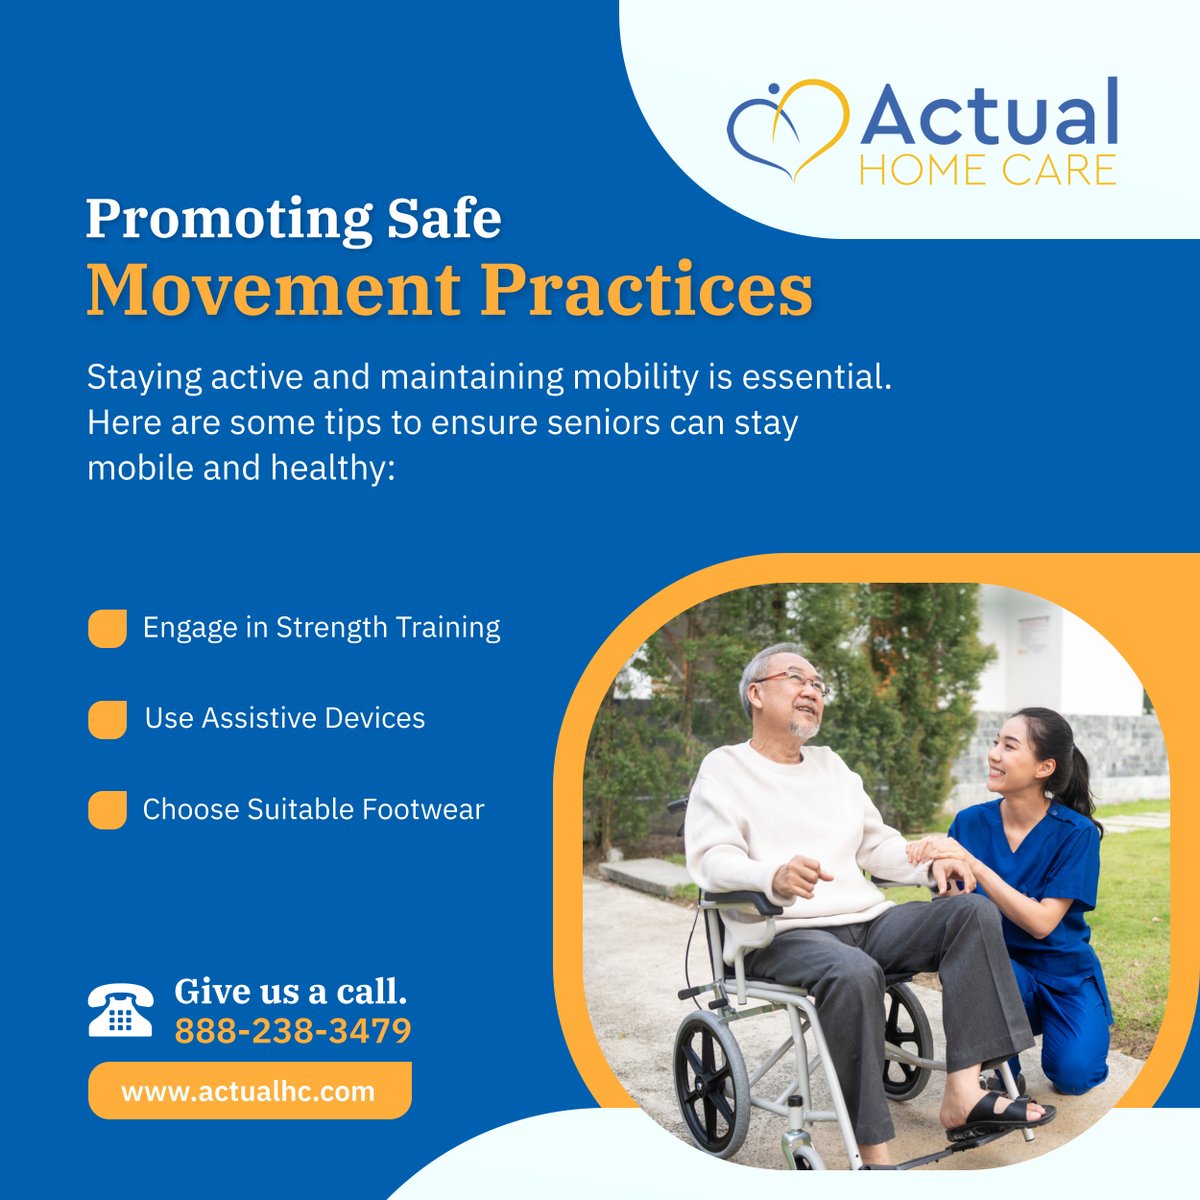 Let's keep moving safely! Whether you're exercising, commuting, or simply getting around, prioritize safety to enjoy a life in motion.

#HomeCare #TotowaNJ #SafeMovement #SafetyPractices